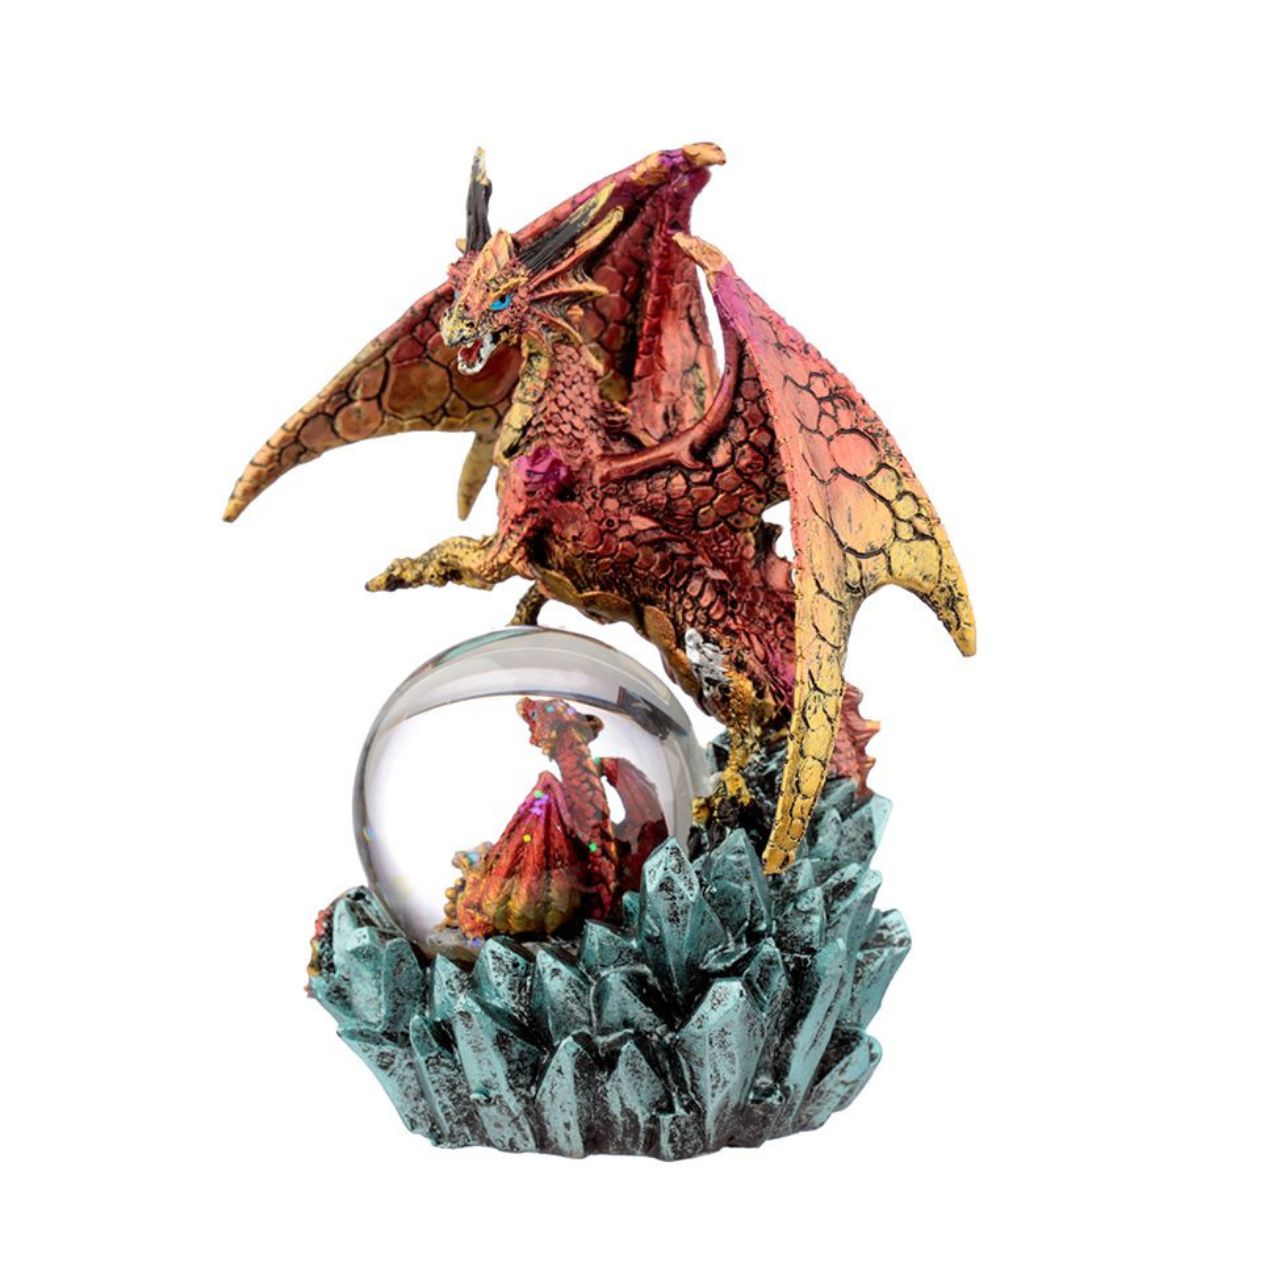 Discover the mystical beauty of the Dark Legends Crystal Orb Dragon Mother Snow Globe by Puckator. Crafted with intricate detail and featuring a majestic dragon mother protecting her crystal orb, this snow globe will add a touch of magic to any space. Perfect for dragon lovers and collectors.